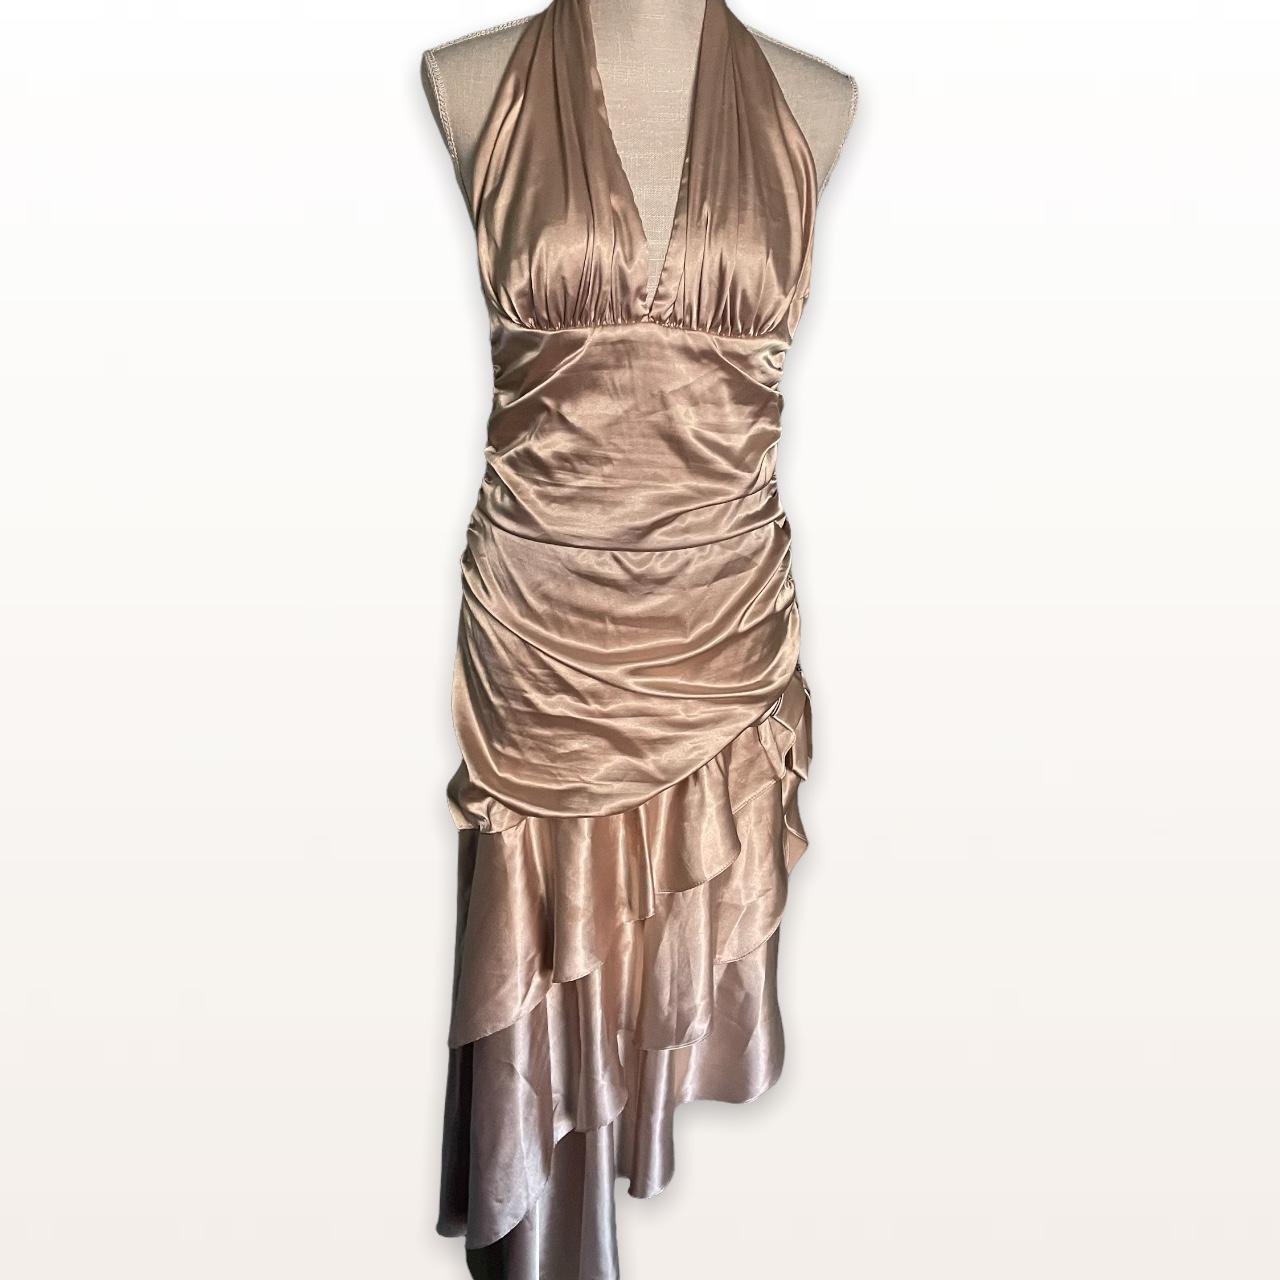 Product Image 4 - 90s champagne evening gown 🥂
-